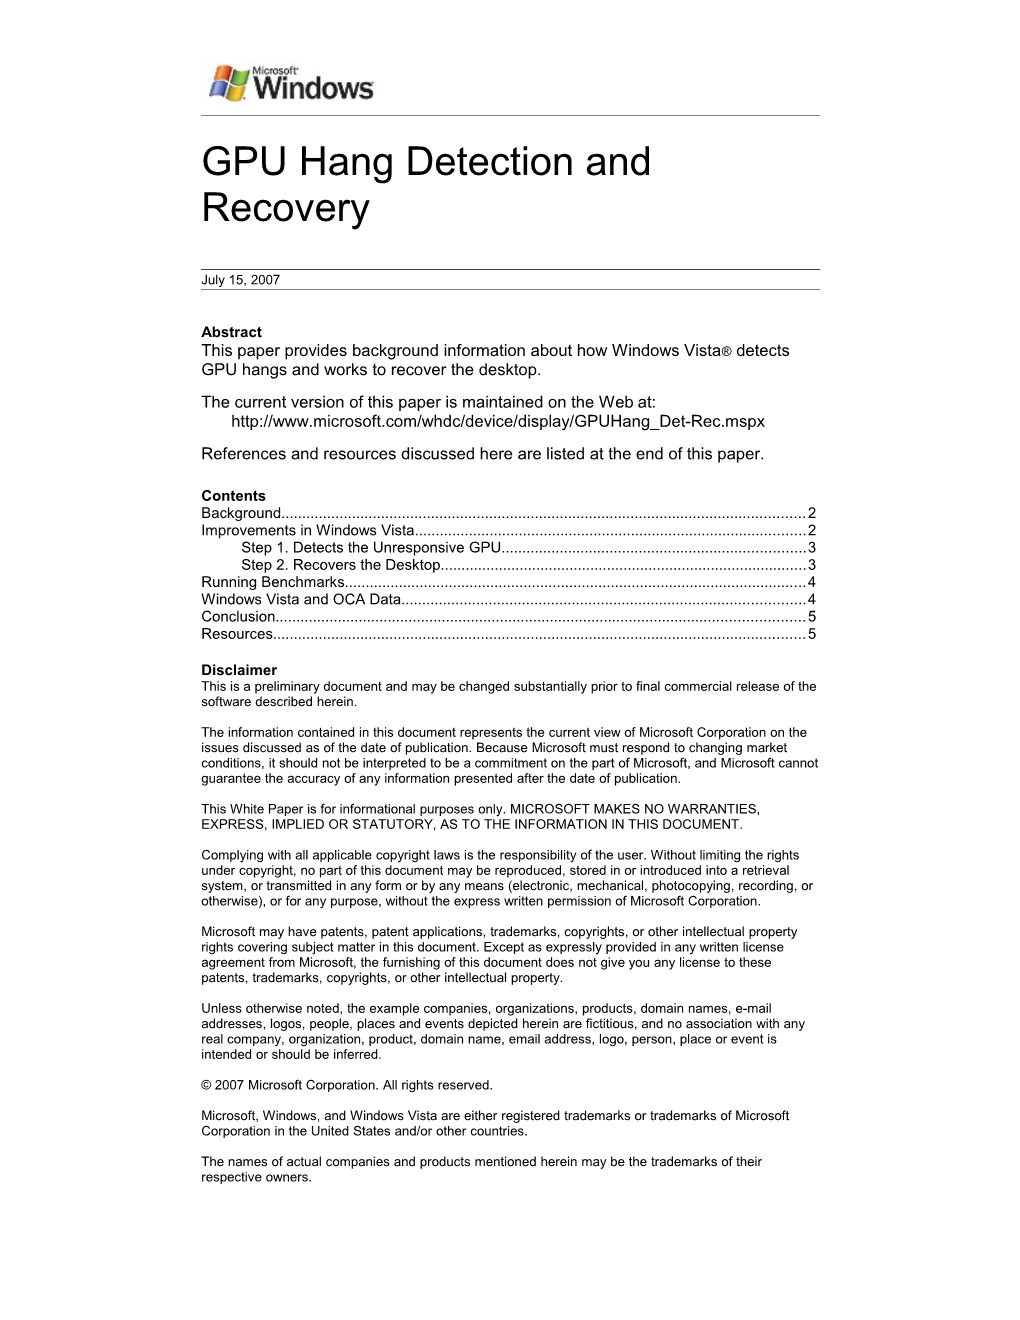 GPU Hang Detection and Recovery